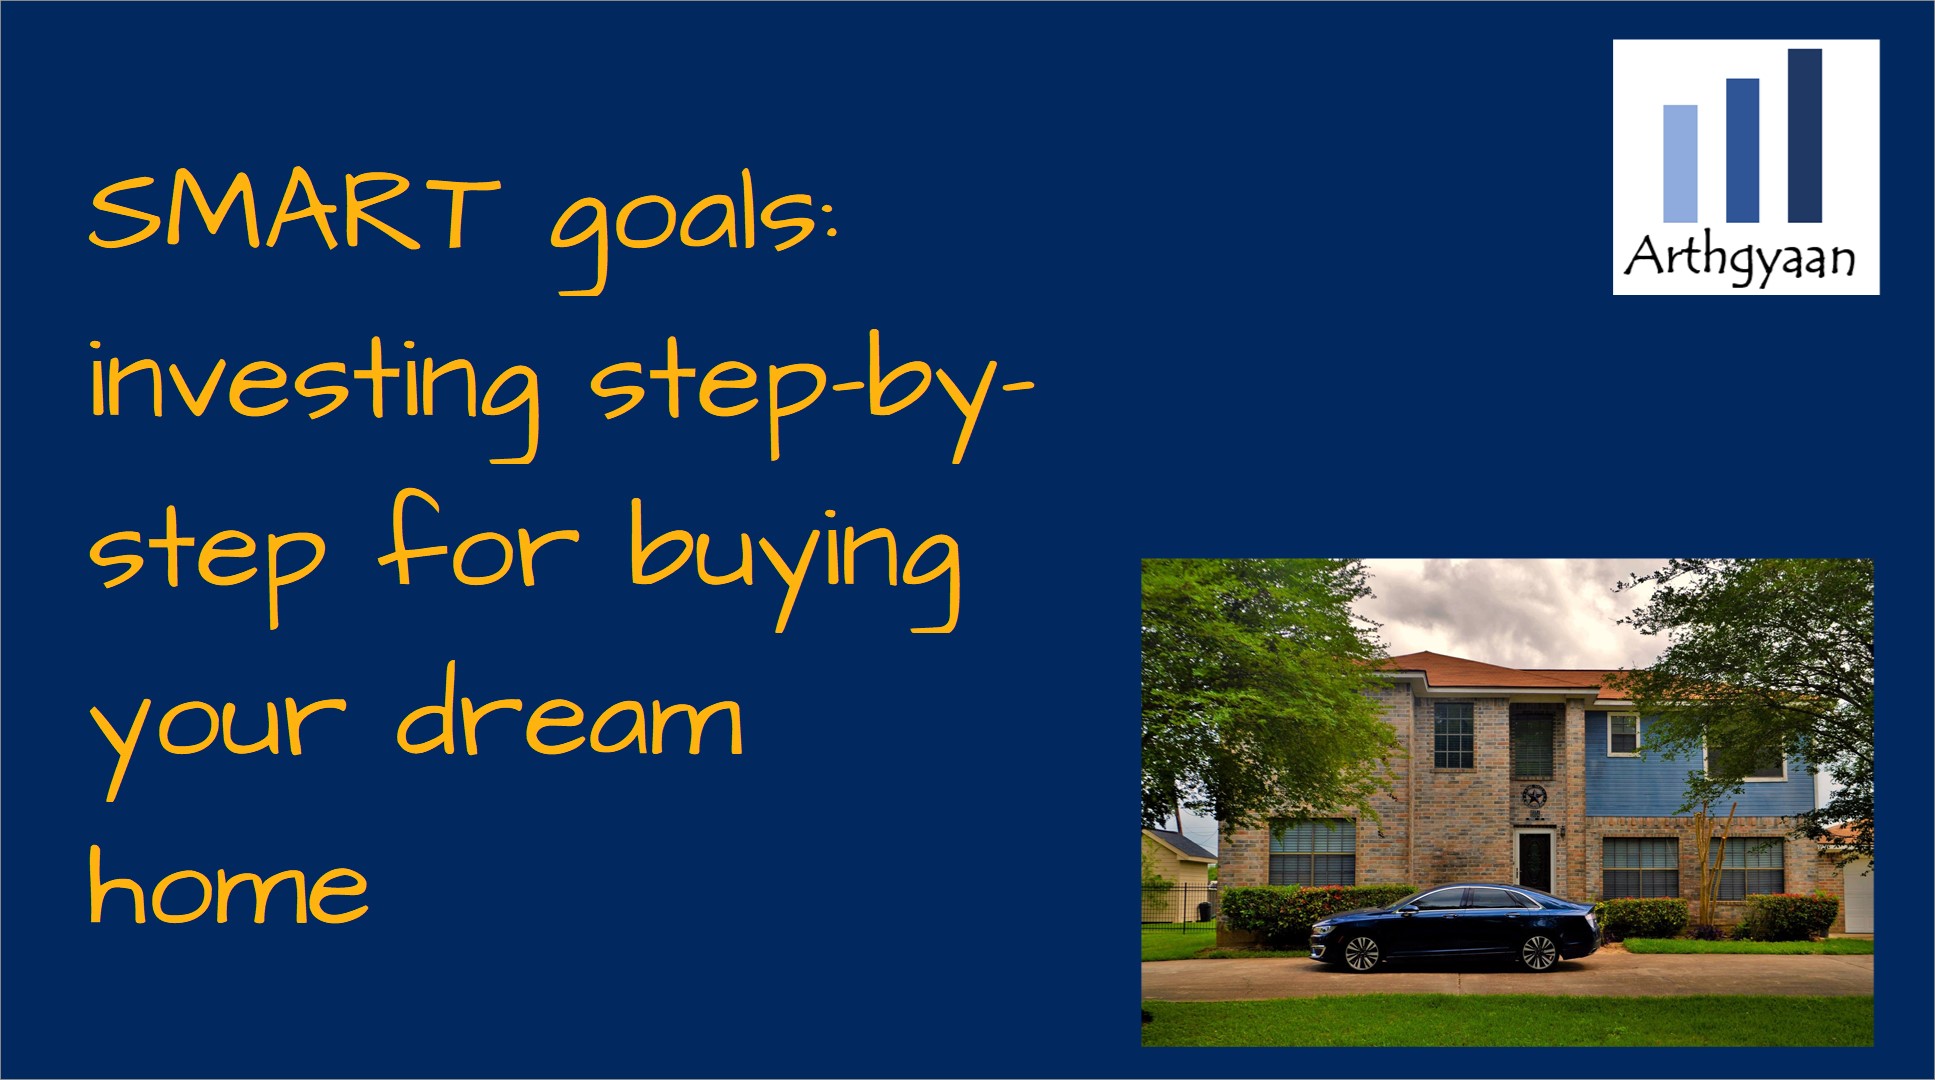 SMART goals: investing step-by-step for buying your dream home